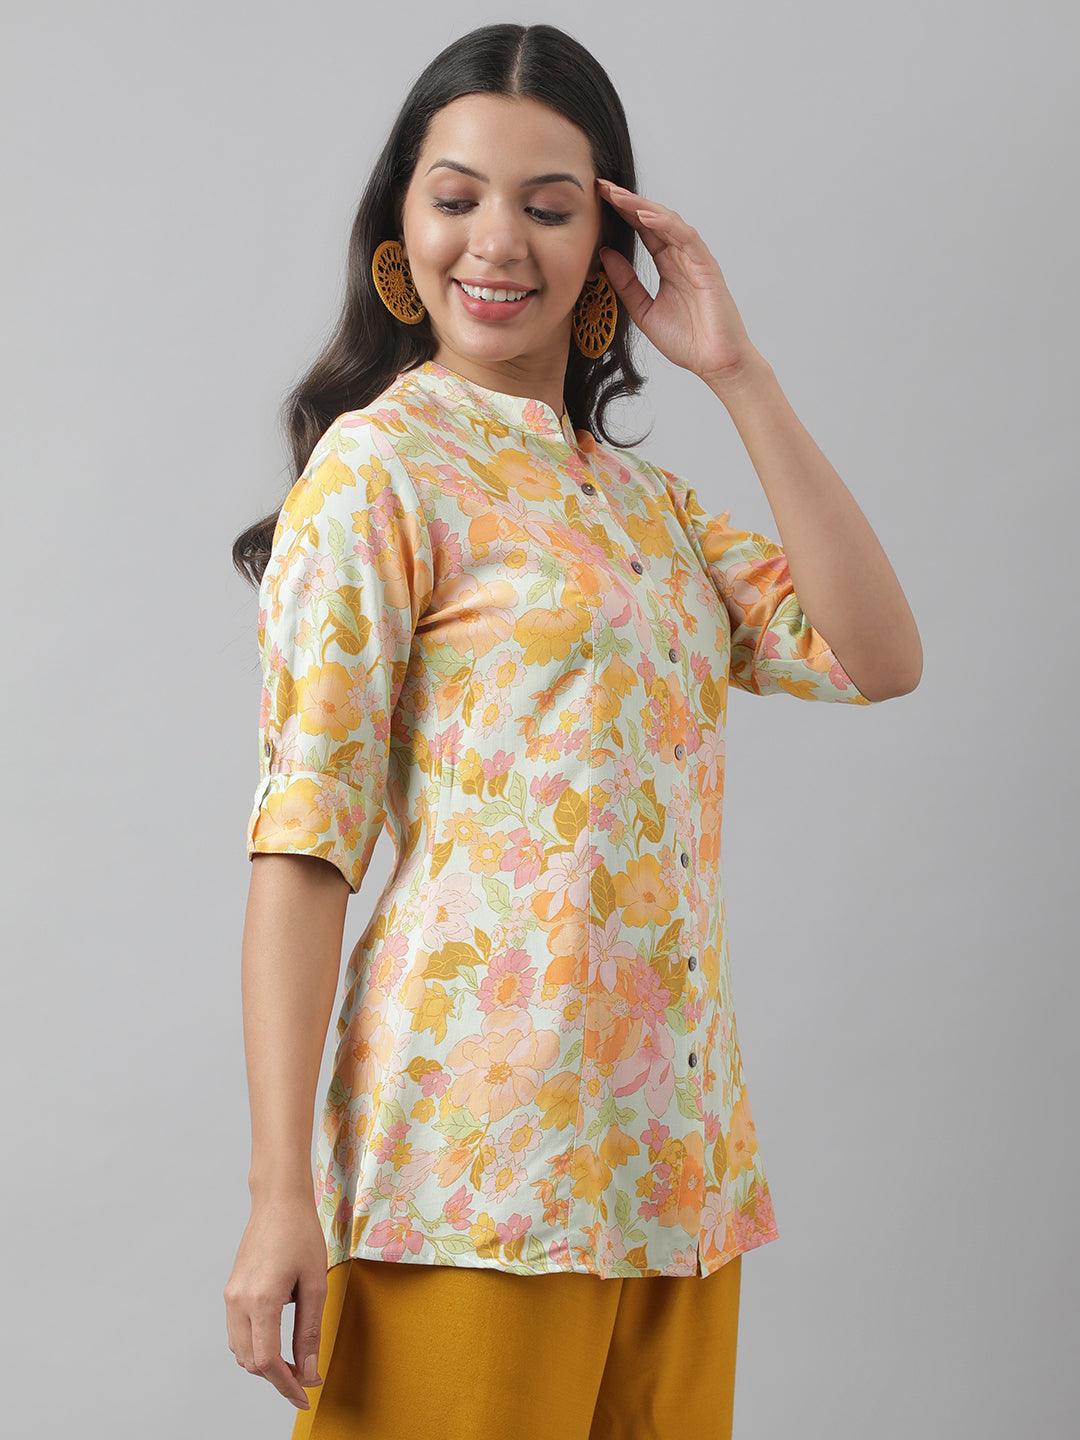 Divena Pista Green Floral Printed Rayon A-line Shirt Style Top - divena world